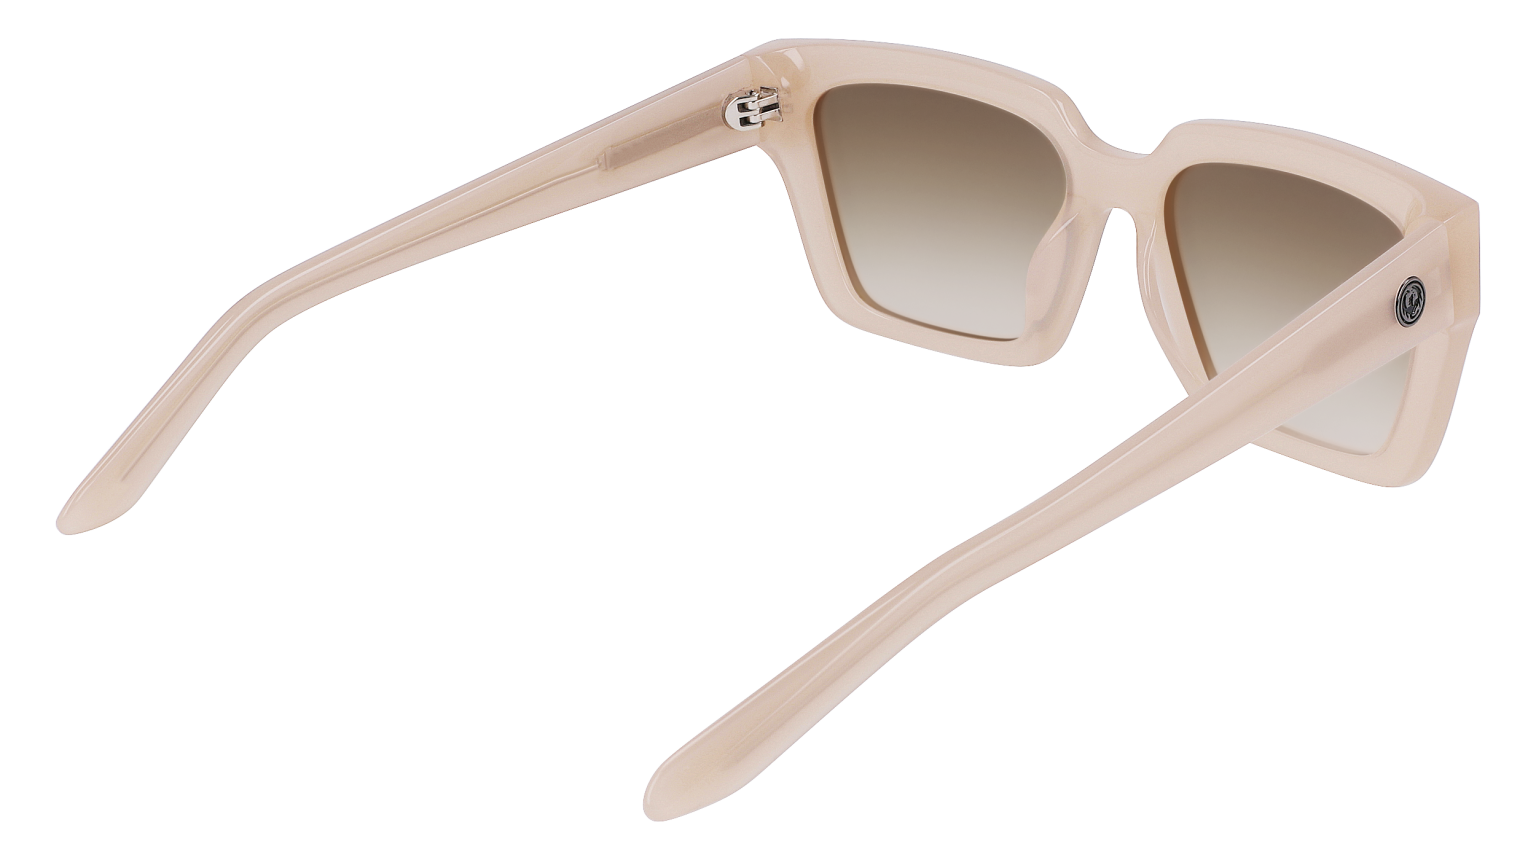 TARRAN - Milky Taupe with Lumalens Brown Gradient Lens